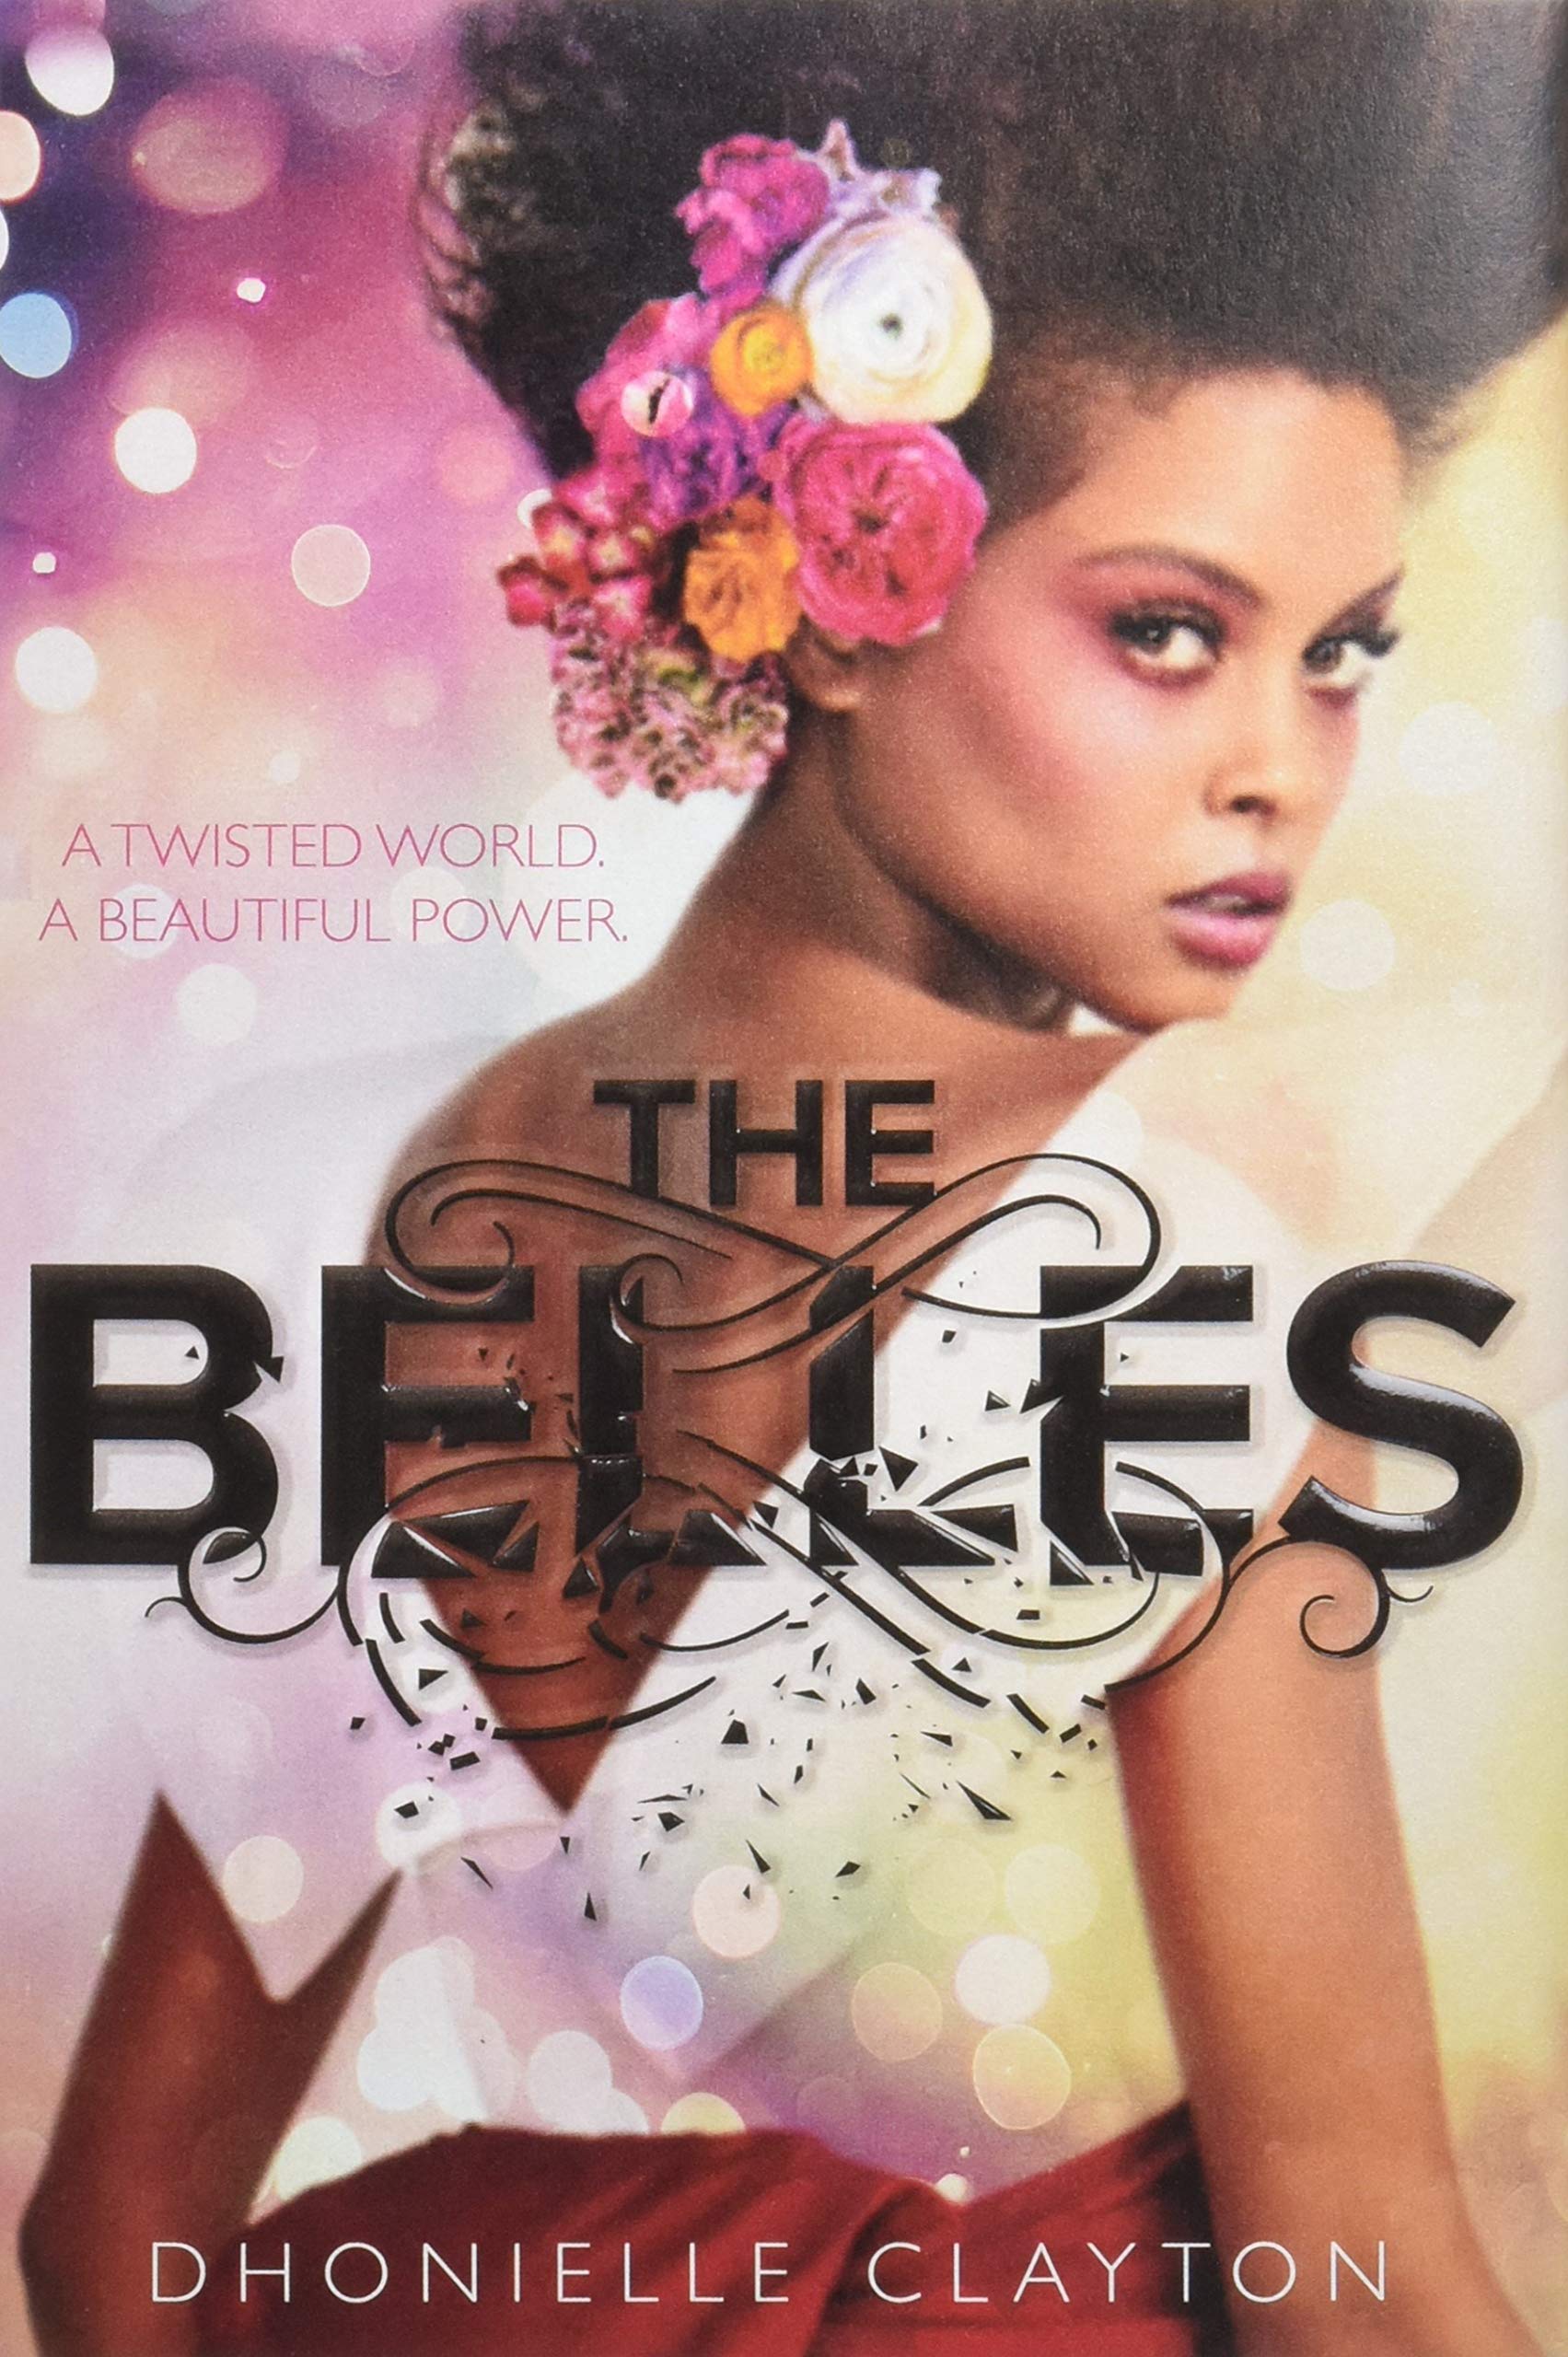 Book Review: “The Belles” (The Belles #1) by Dhonielle Clayton